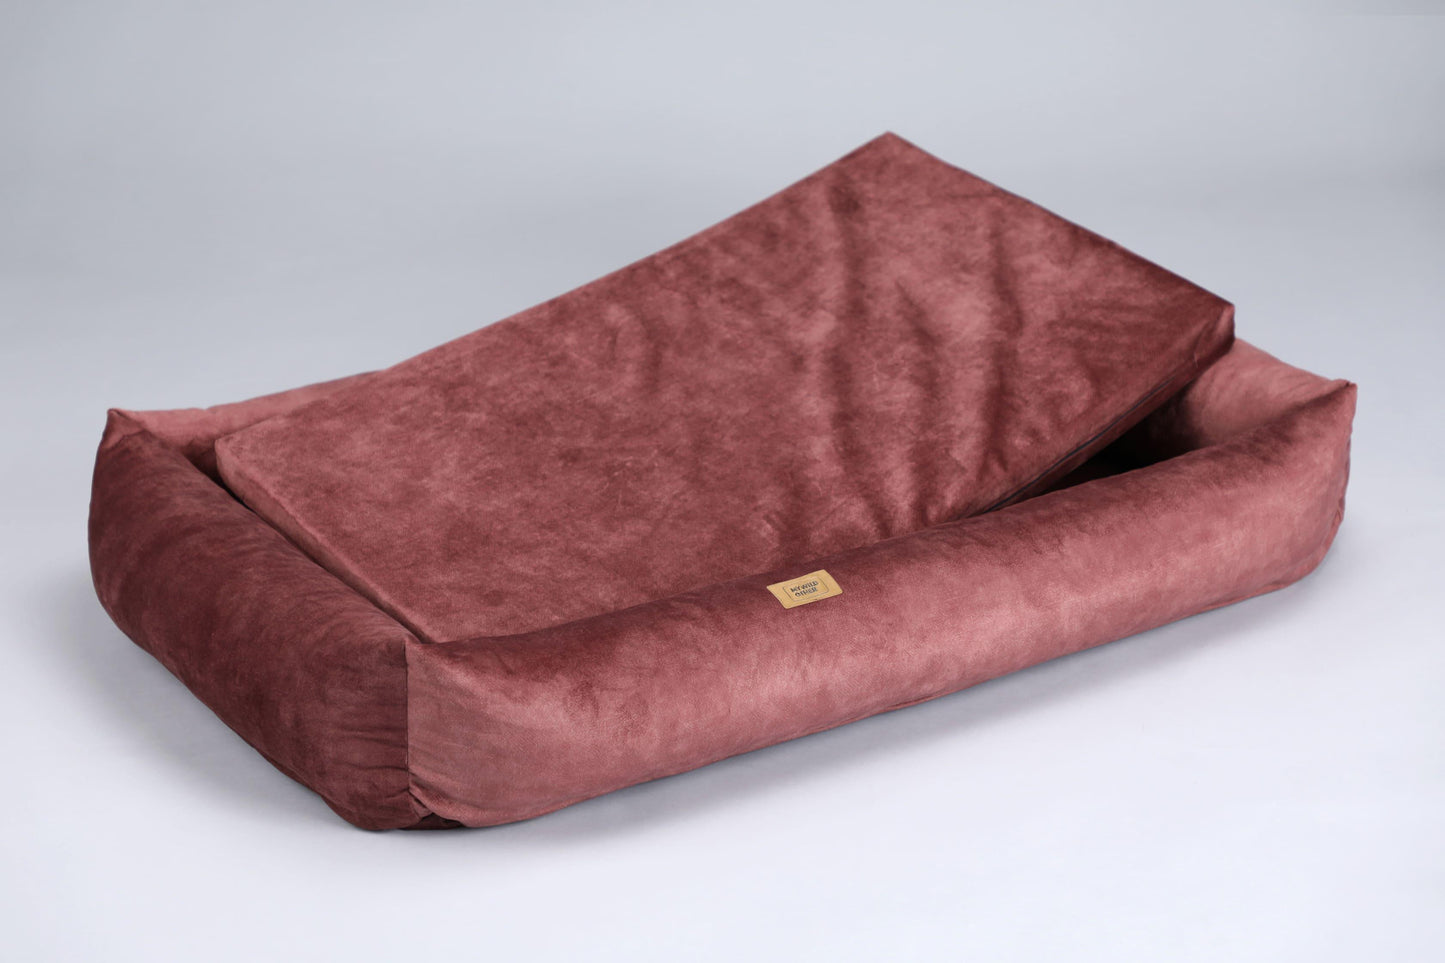 L only | 2-sided dog bed with sides. TERRACOTTA - premium dog goods handmade in Europe by animalistus